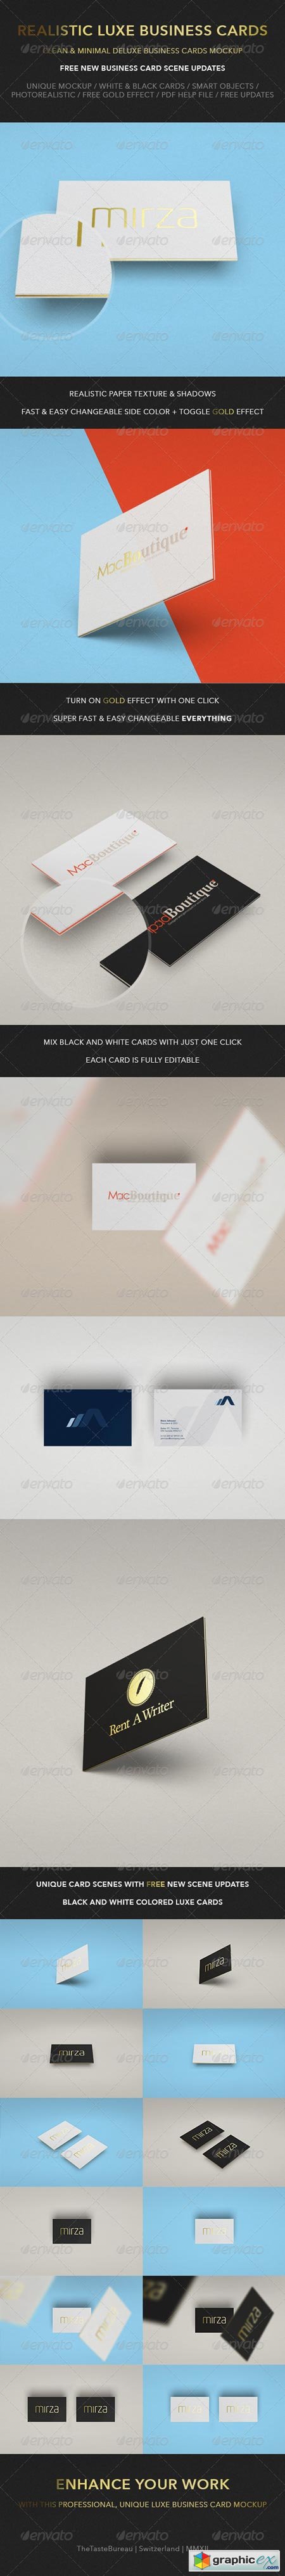 Realistic Luxe Business Card Mock-Up 6507623